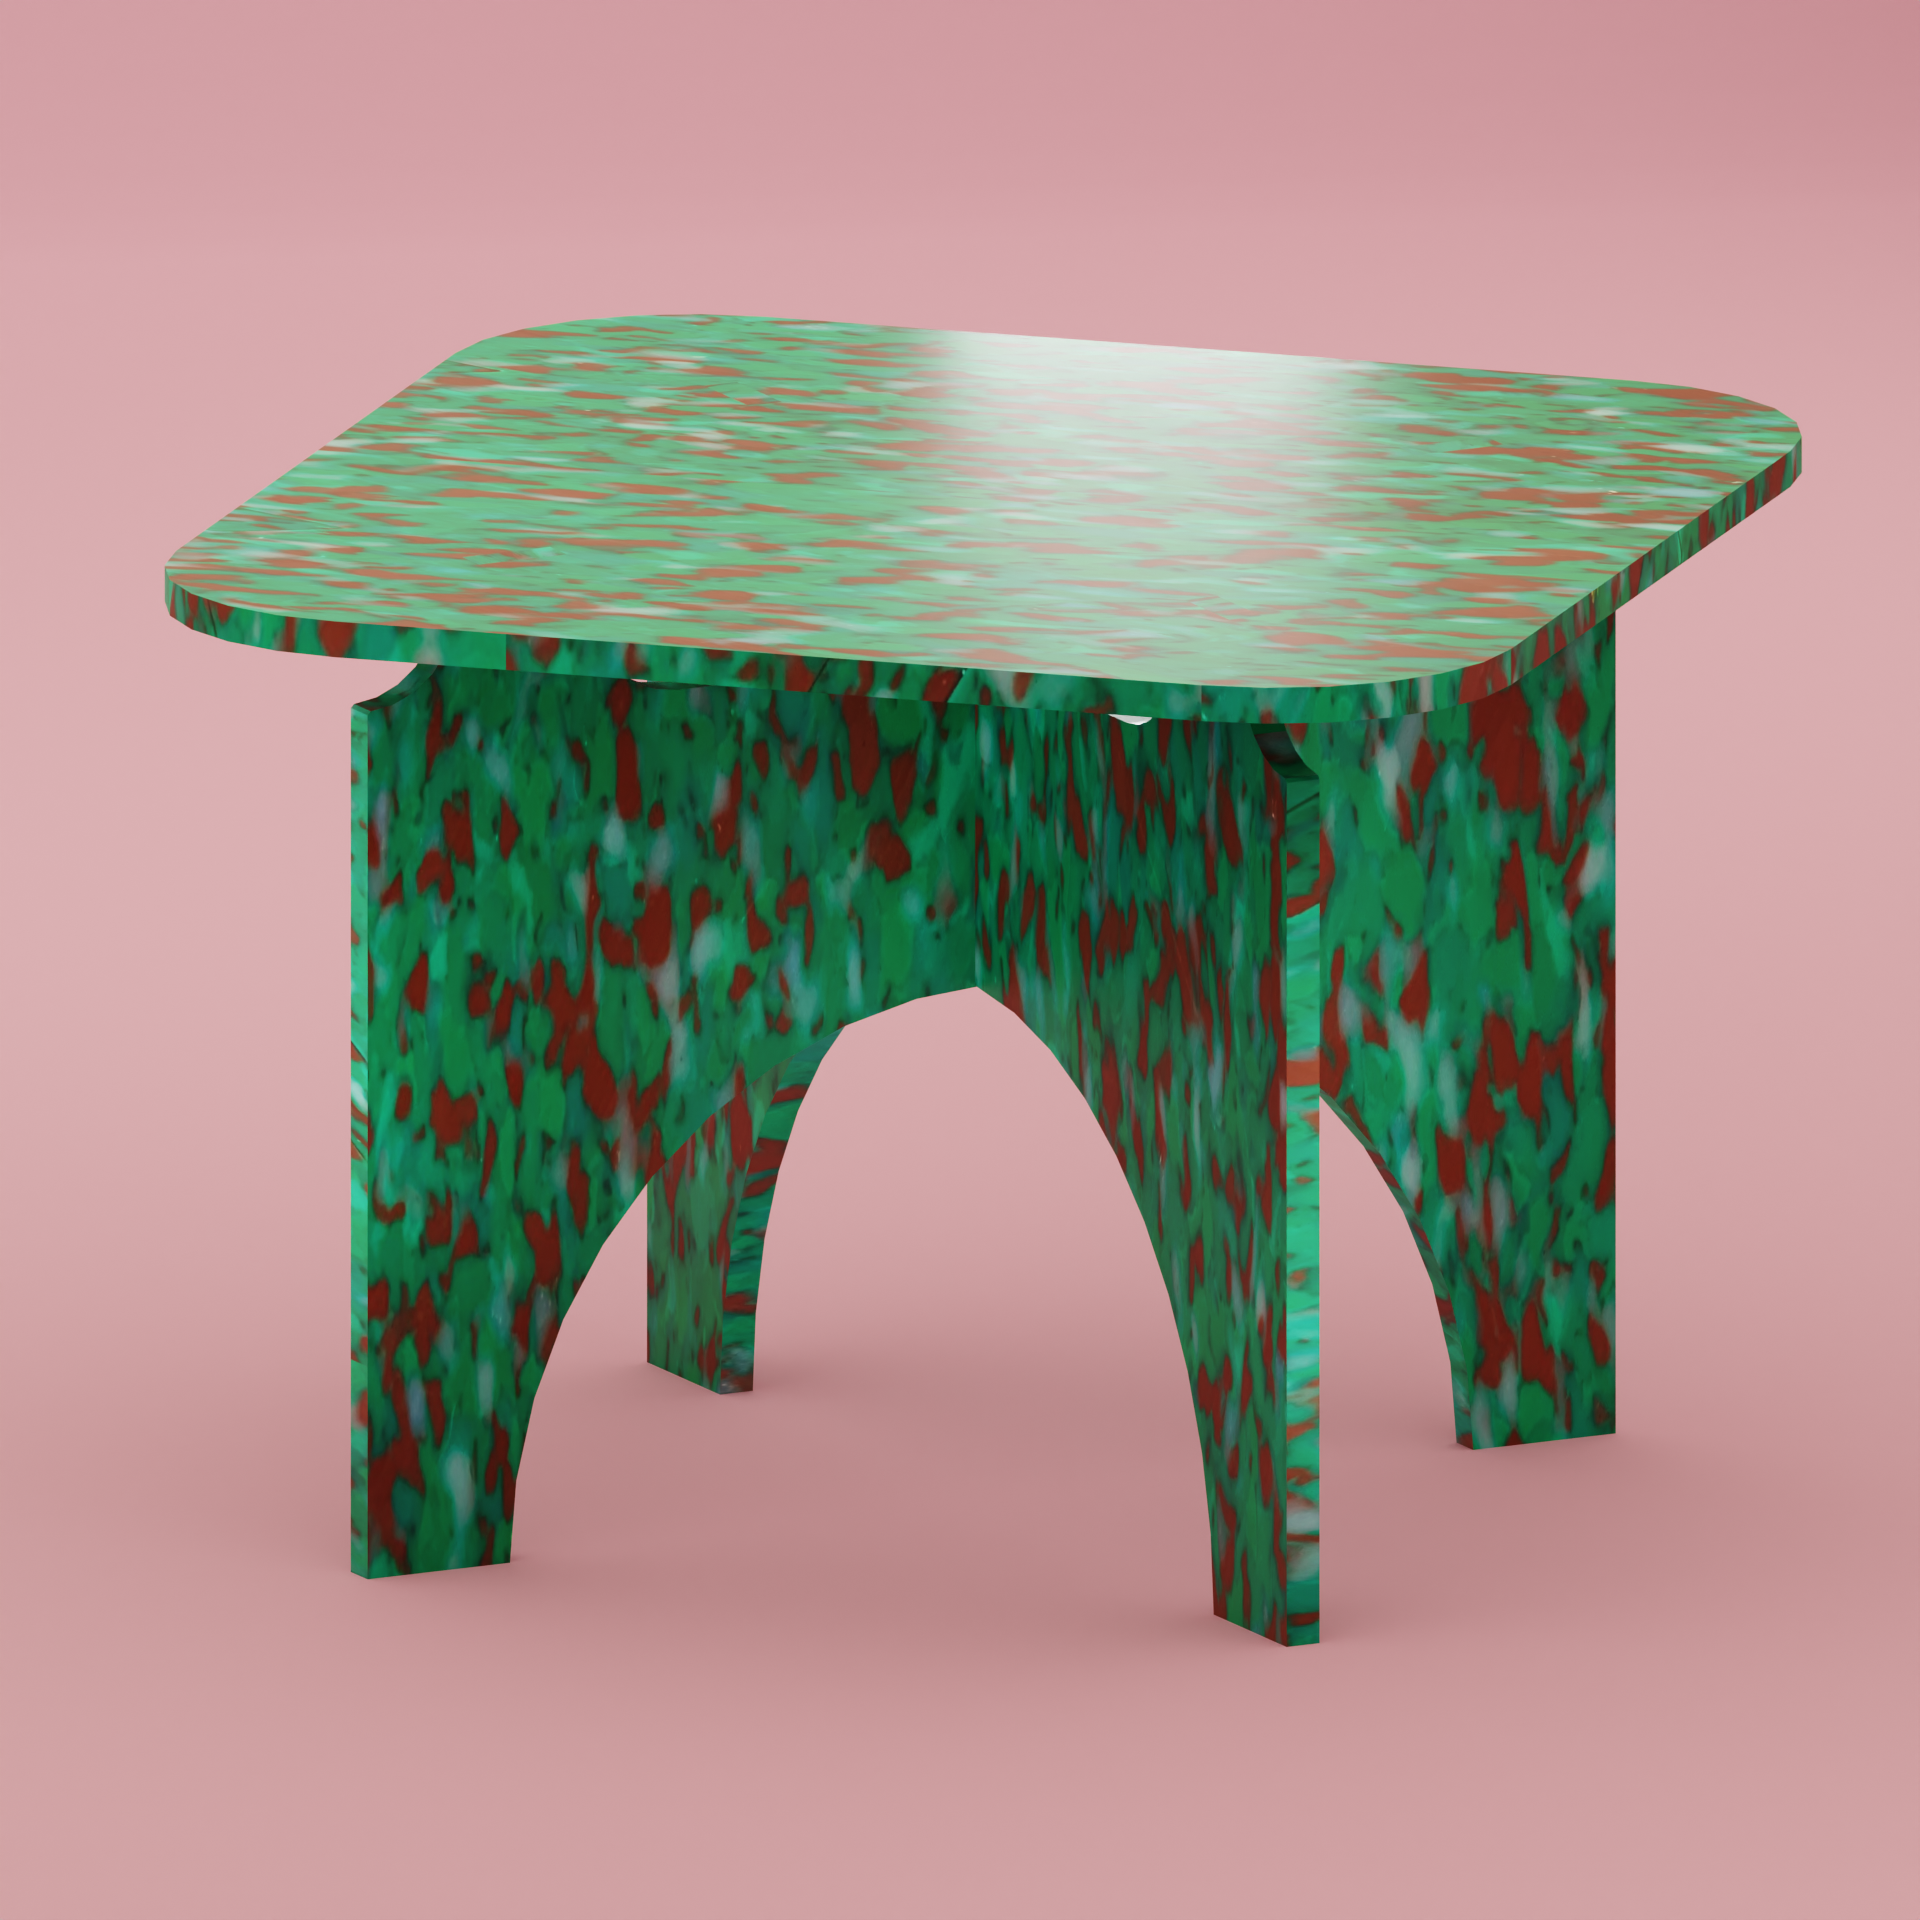 GREEN SQUARE TOP TABLE BY THE MINIMONO PROJECT - BRAND FOR ECO FRIENDLY - PLAYFUL - MULTI FUNCTIONAL - SUSTAINABLE - HIGH QUALITY - DESIGN FURNITURE FROM RECYCLED PLASTIC FOR BOTH ADULT AND CHILDREN MADE IN BERLIN GERMANY